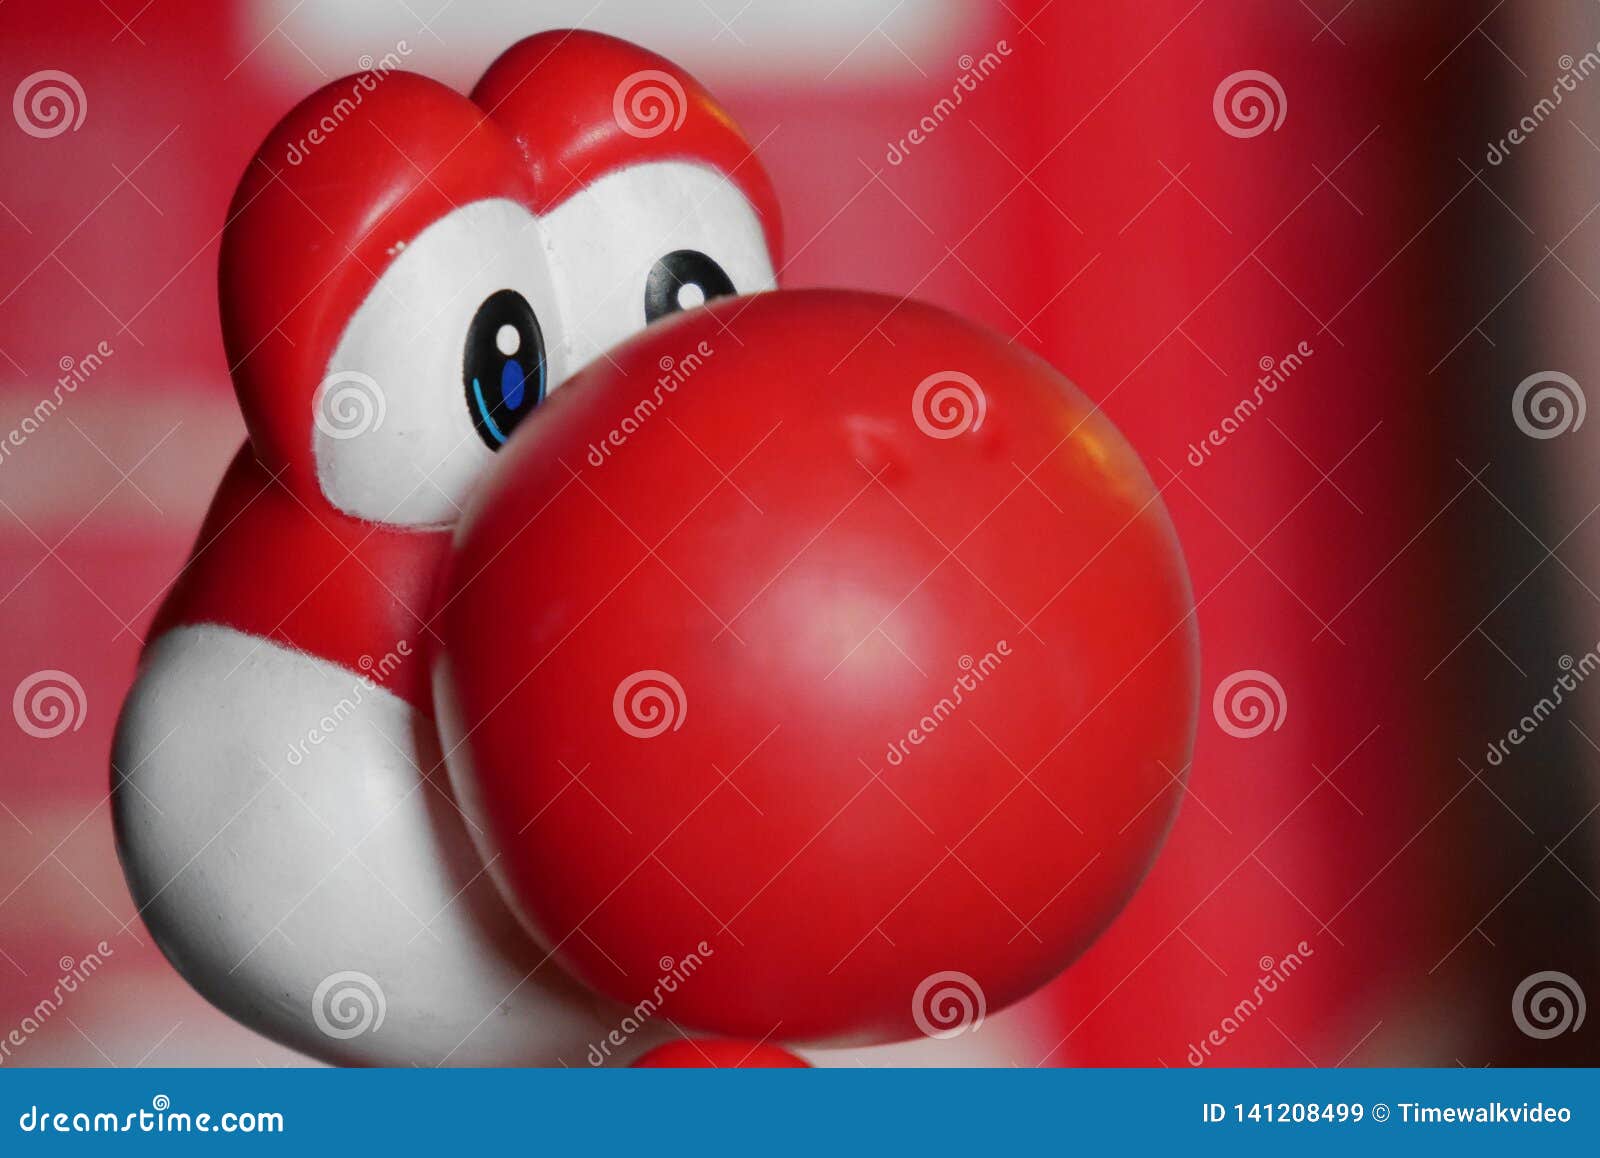 Head Shot of Plastic Red Yoshi Toy Editorial Stock Image - Image of  childhood, japan: 141208499